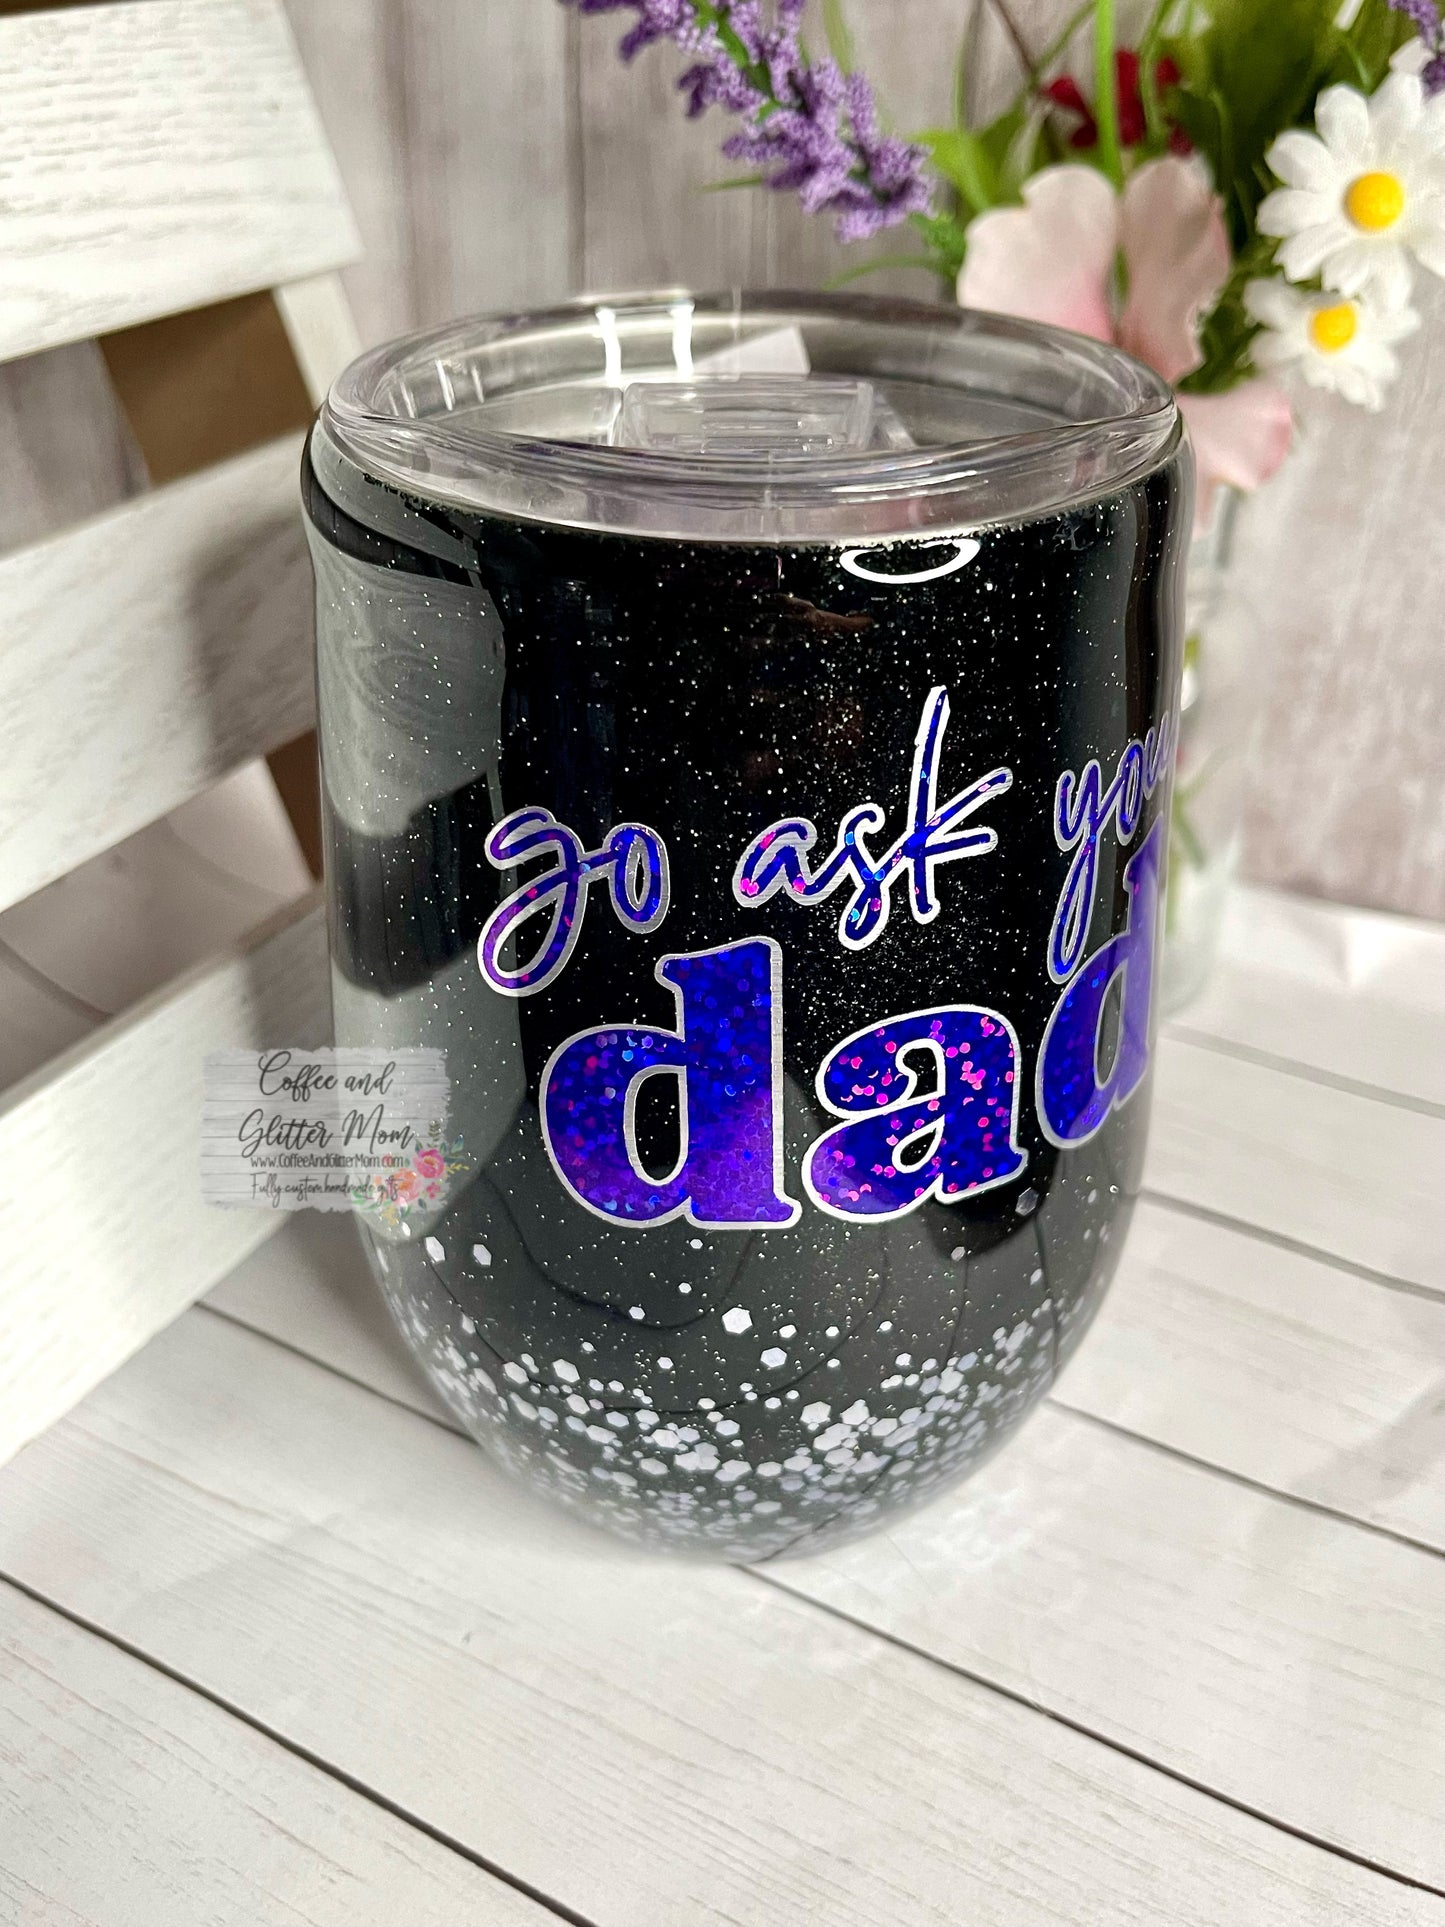 Go Ask Your Dad 15oz Wine Tumbler with Lid and Straw